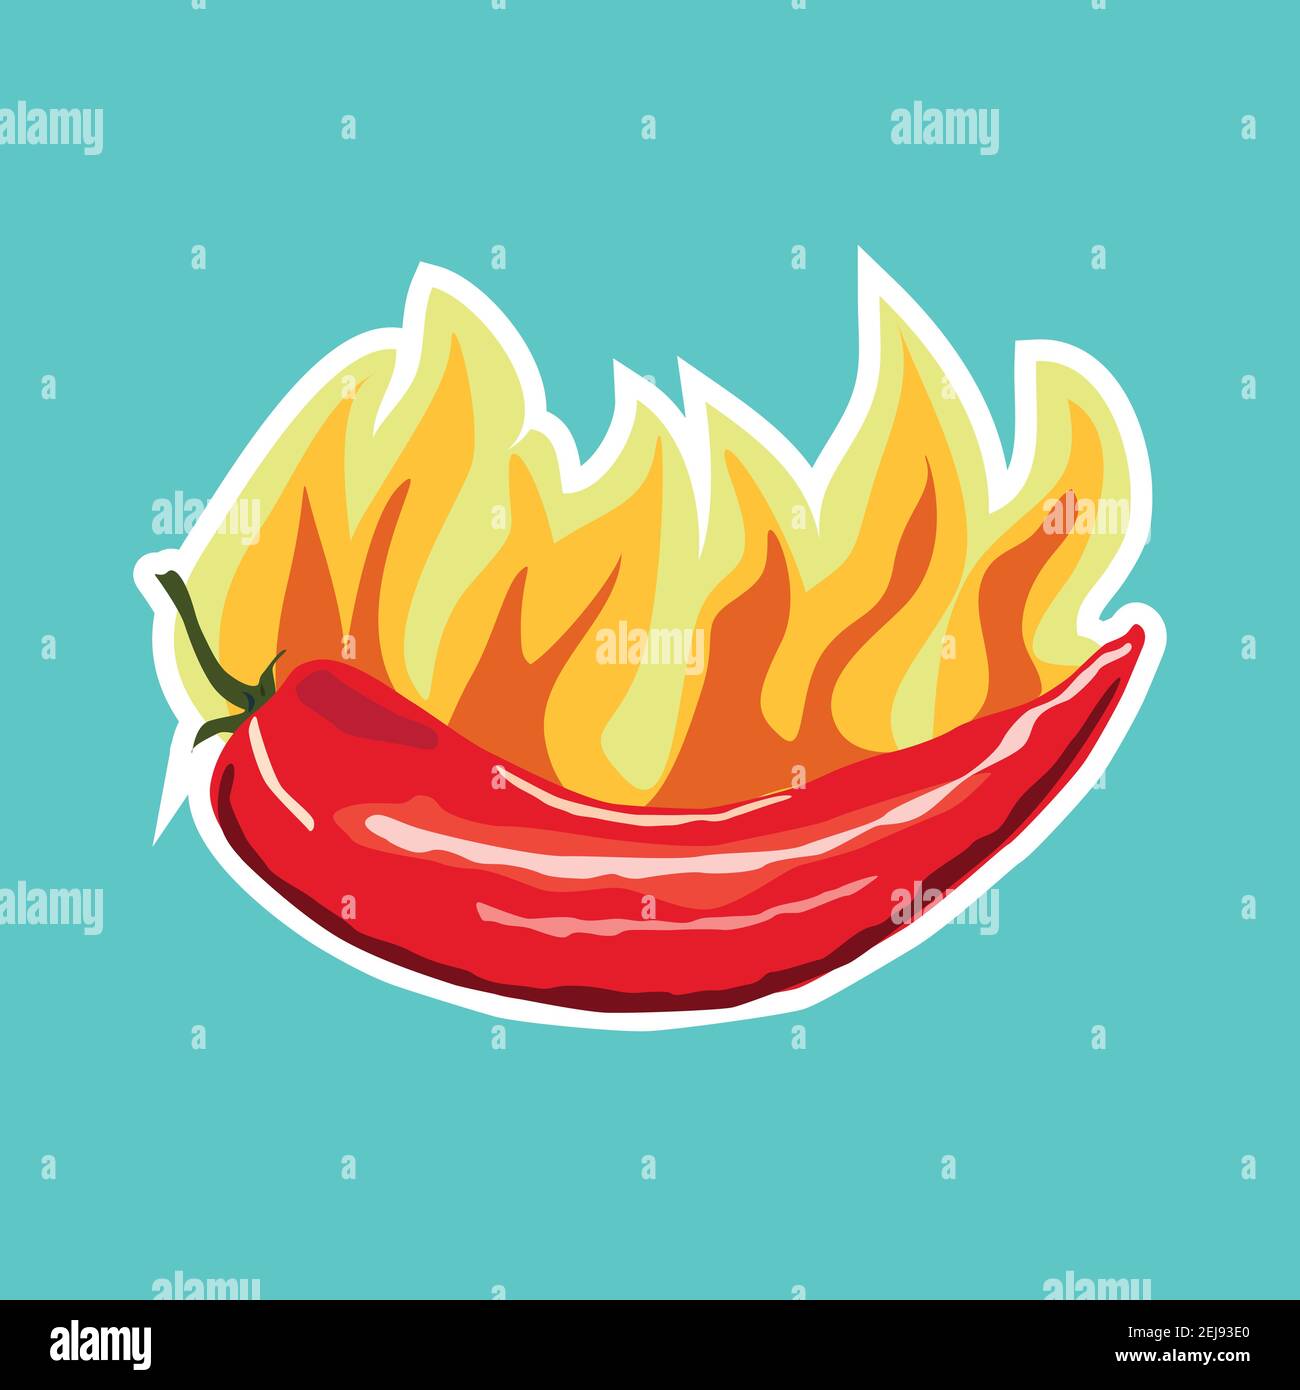 Chilli pepper icon sticker. Flat style vector illustration. Vegetarian food. Healthy lifestyle. Stock Vector